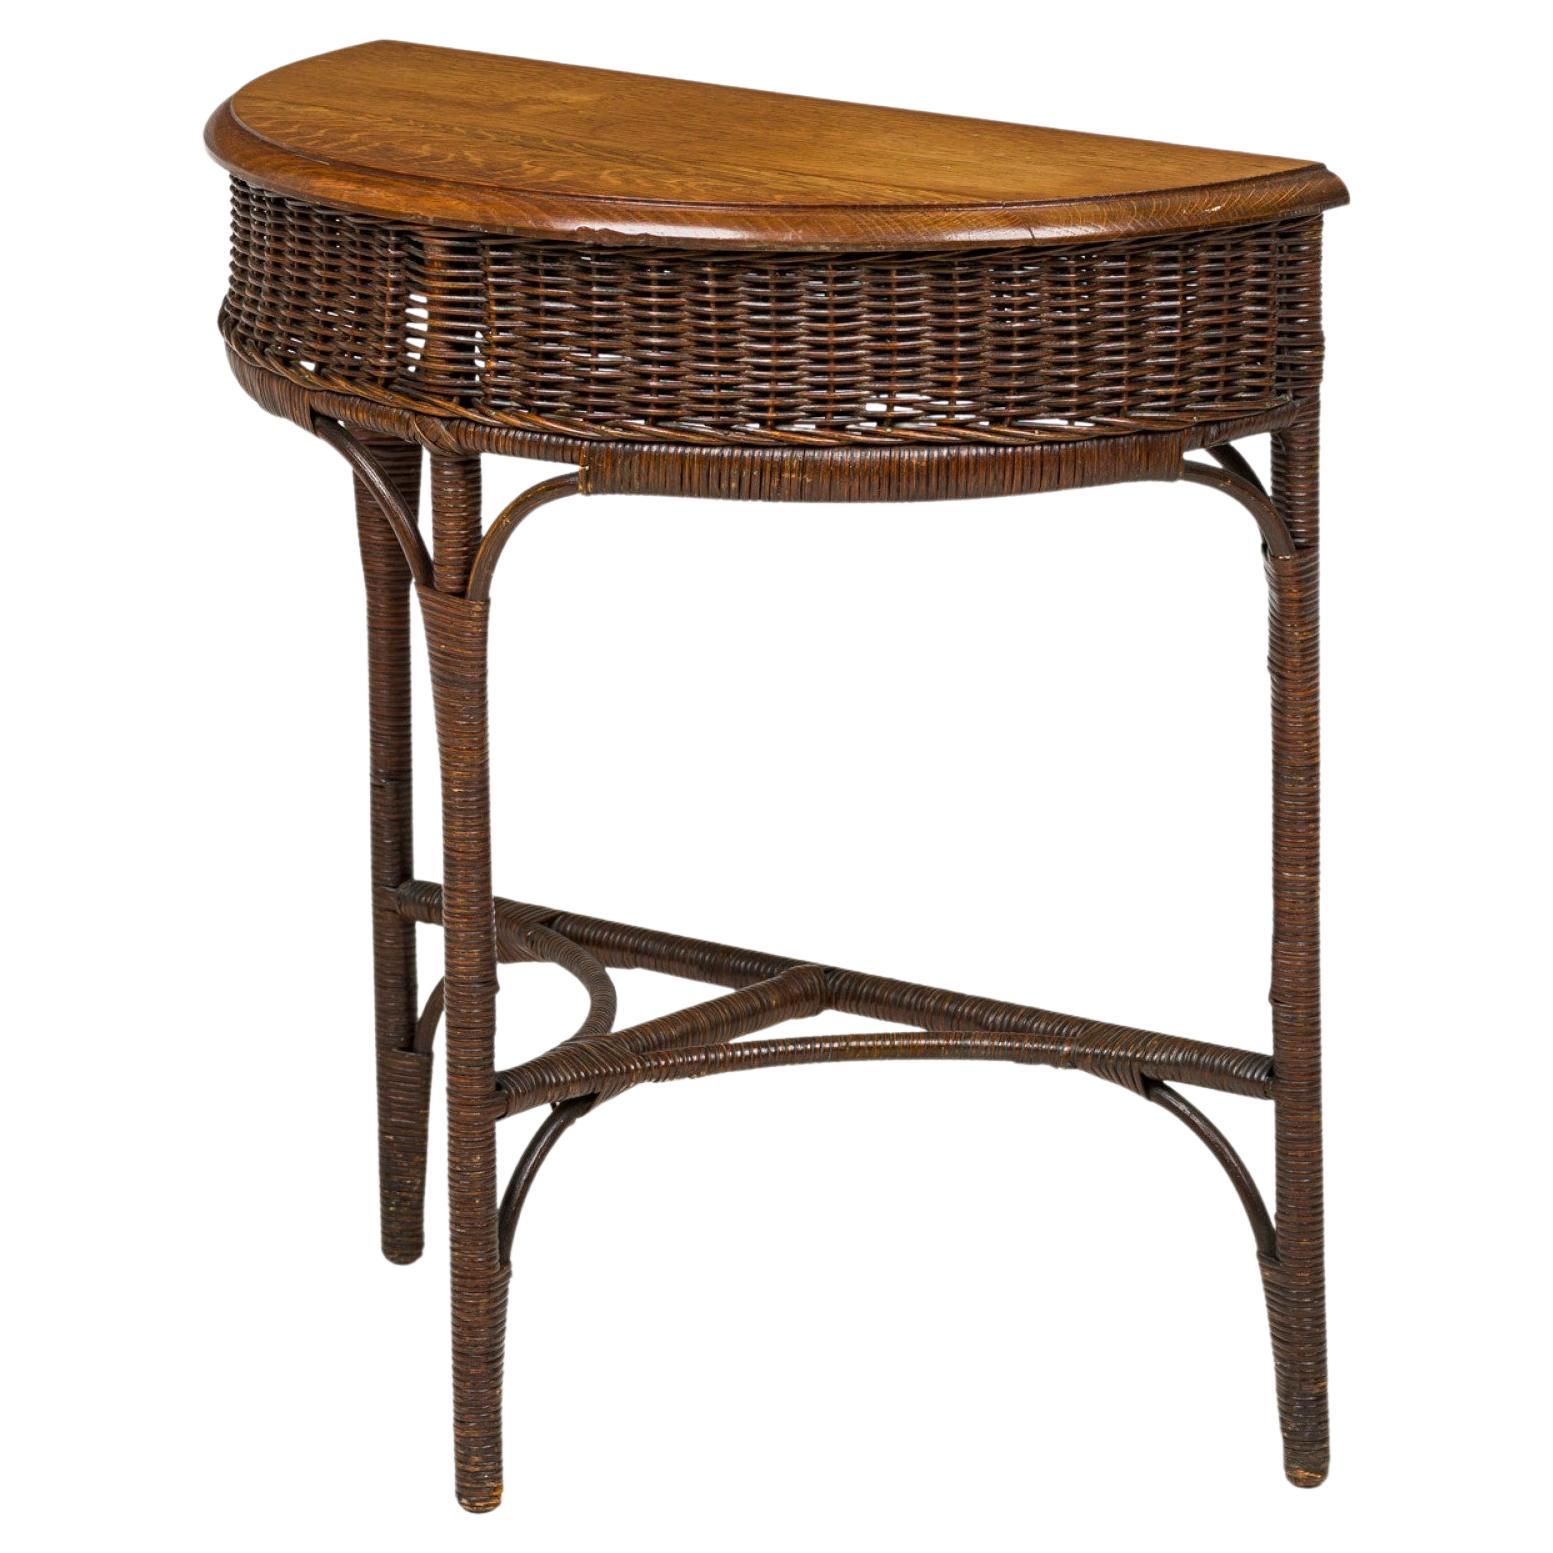 American Victorian Wicker and Oak Topped Demilune 3-Legged Console Table